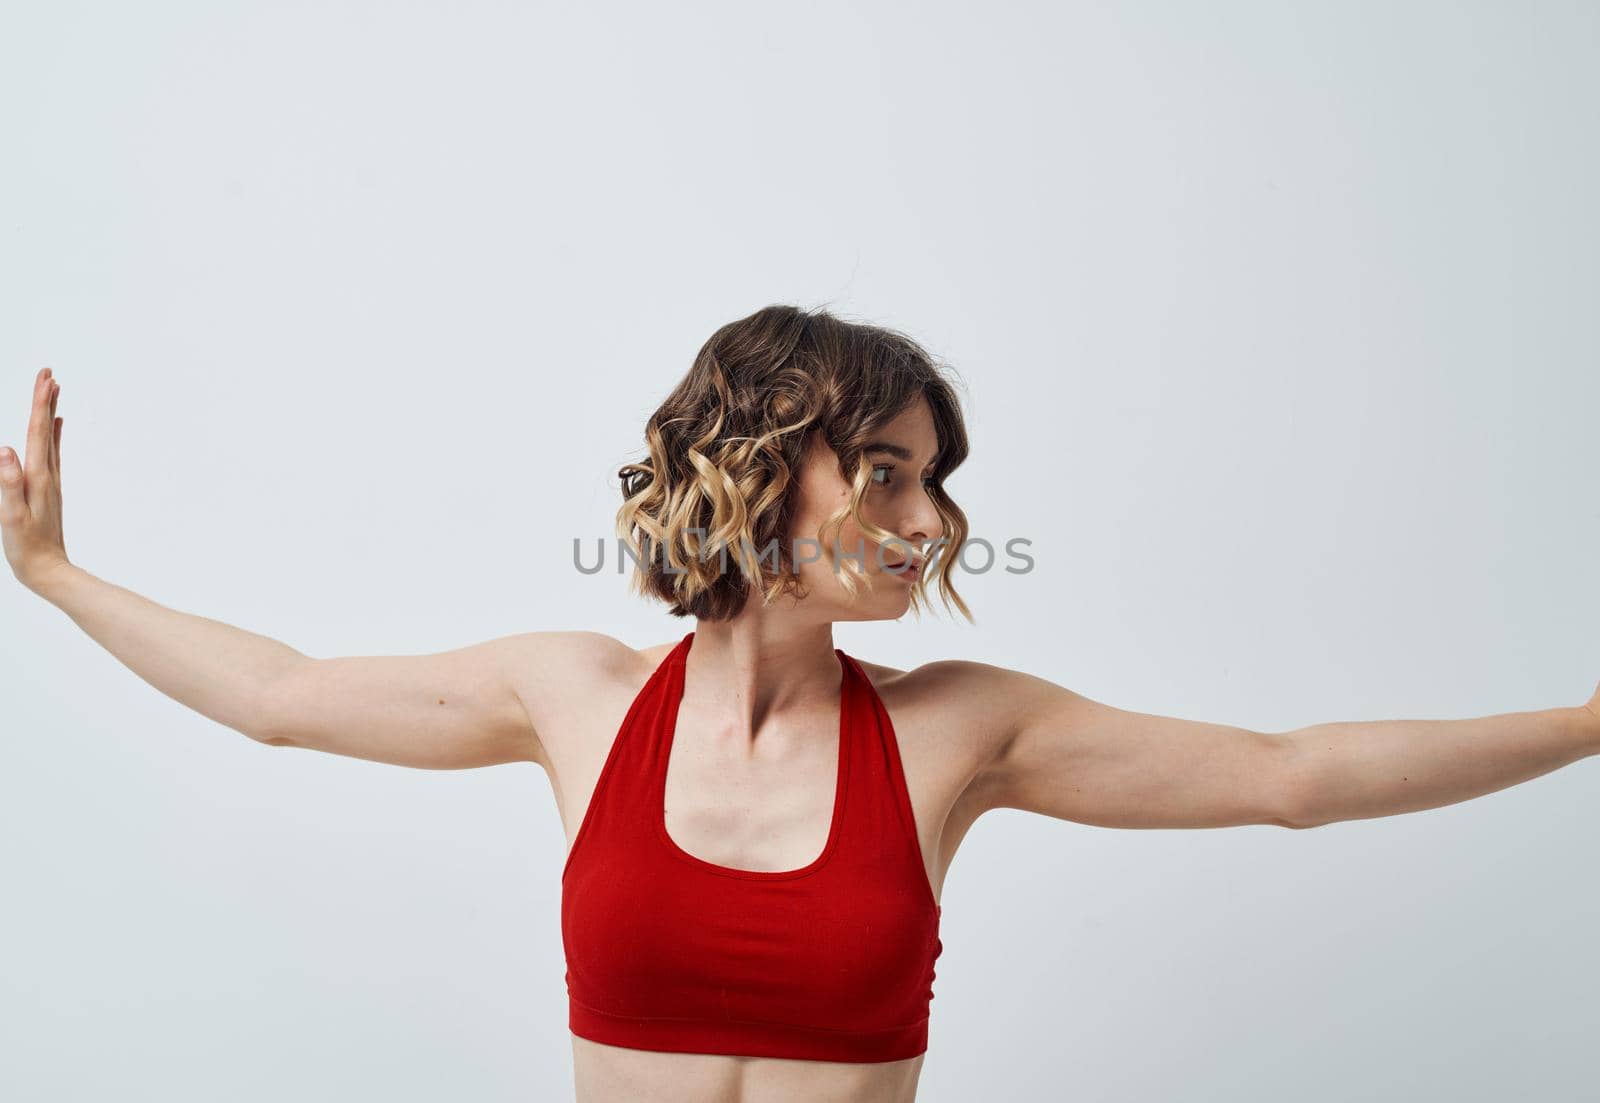 Woman in sportswear on a light background gestures with her hands yoga asana by SHOTPRIME